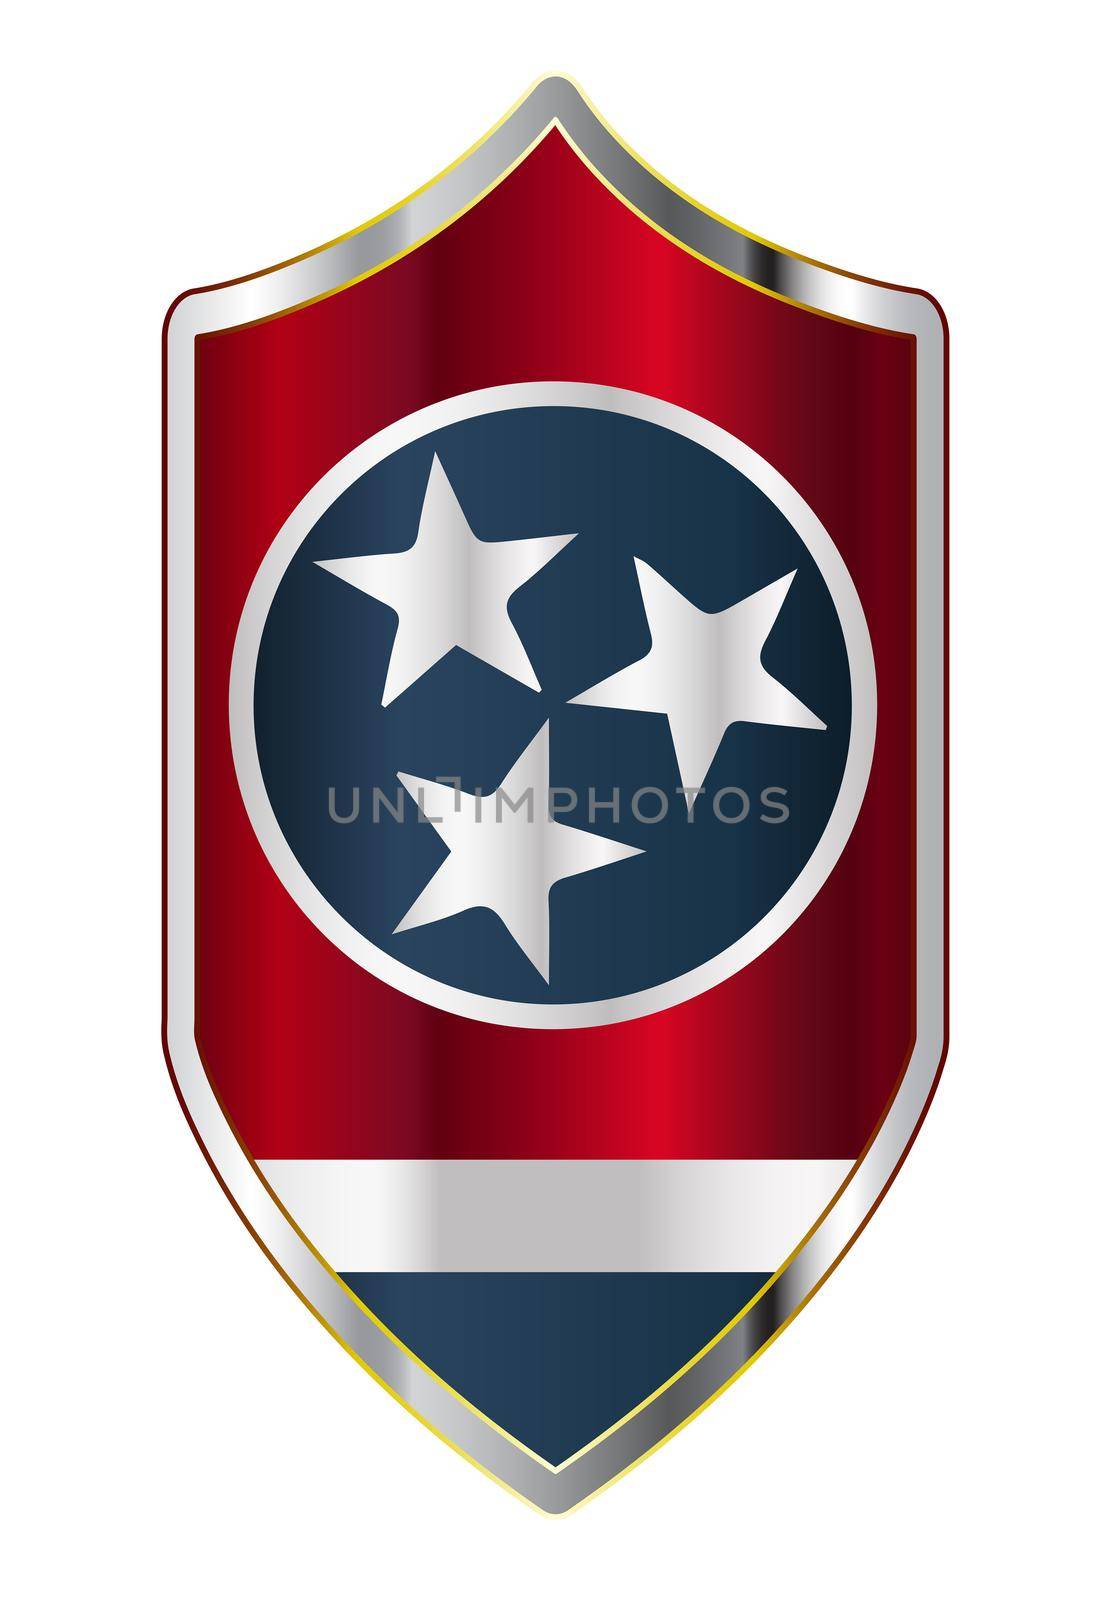 A typical crusader type shield with the state flag of Tennessee all isolated on a white background